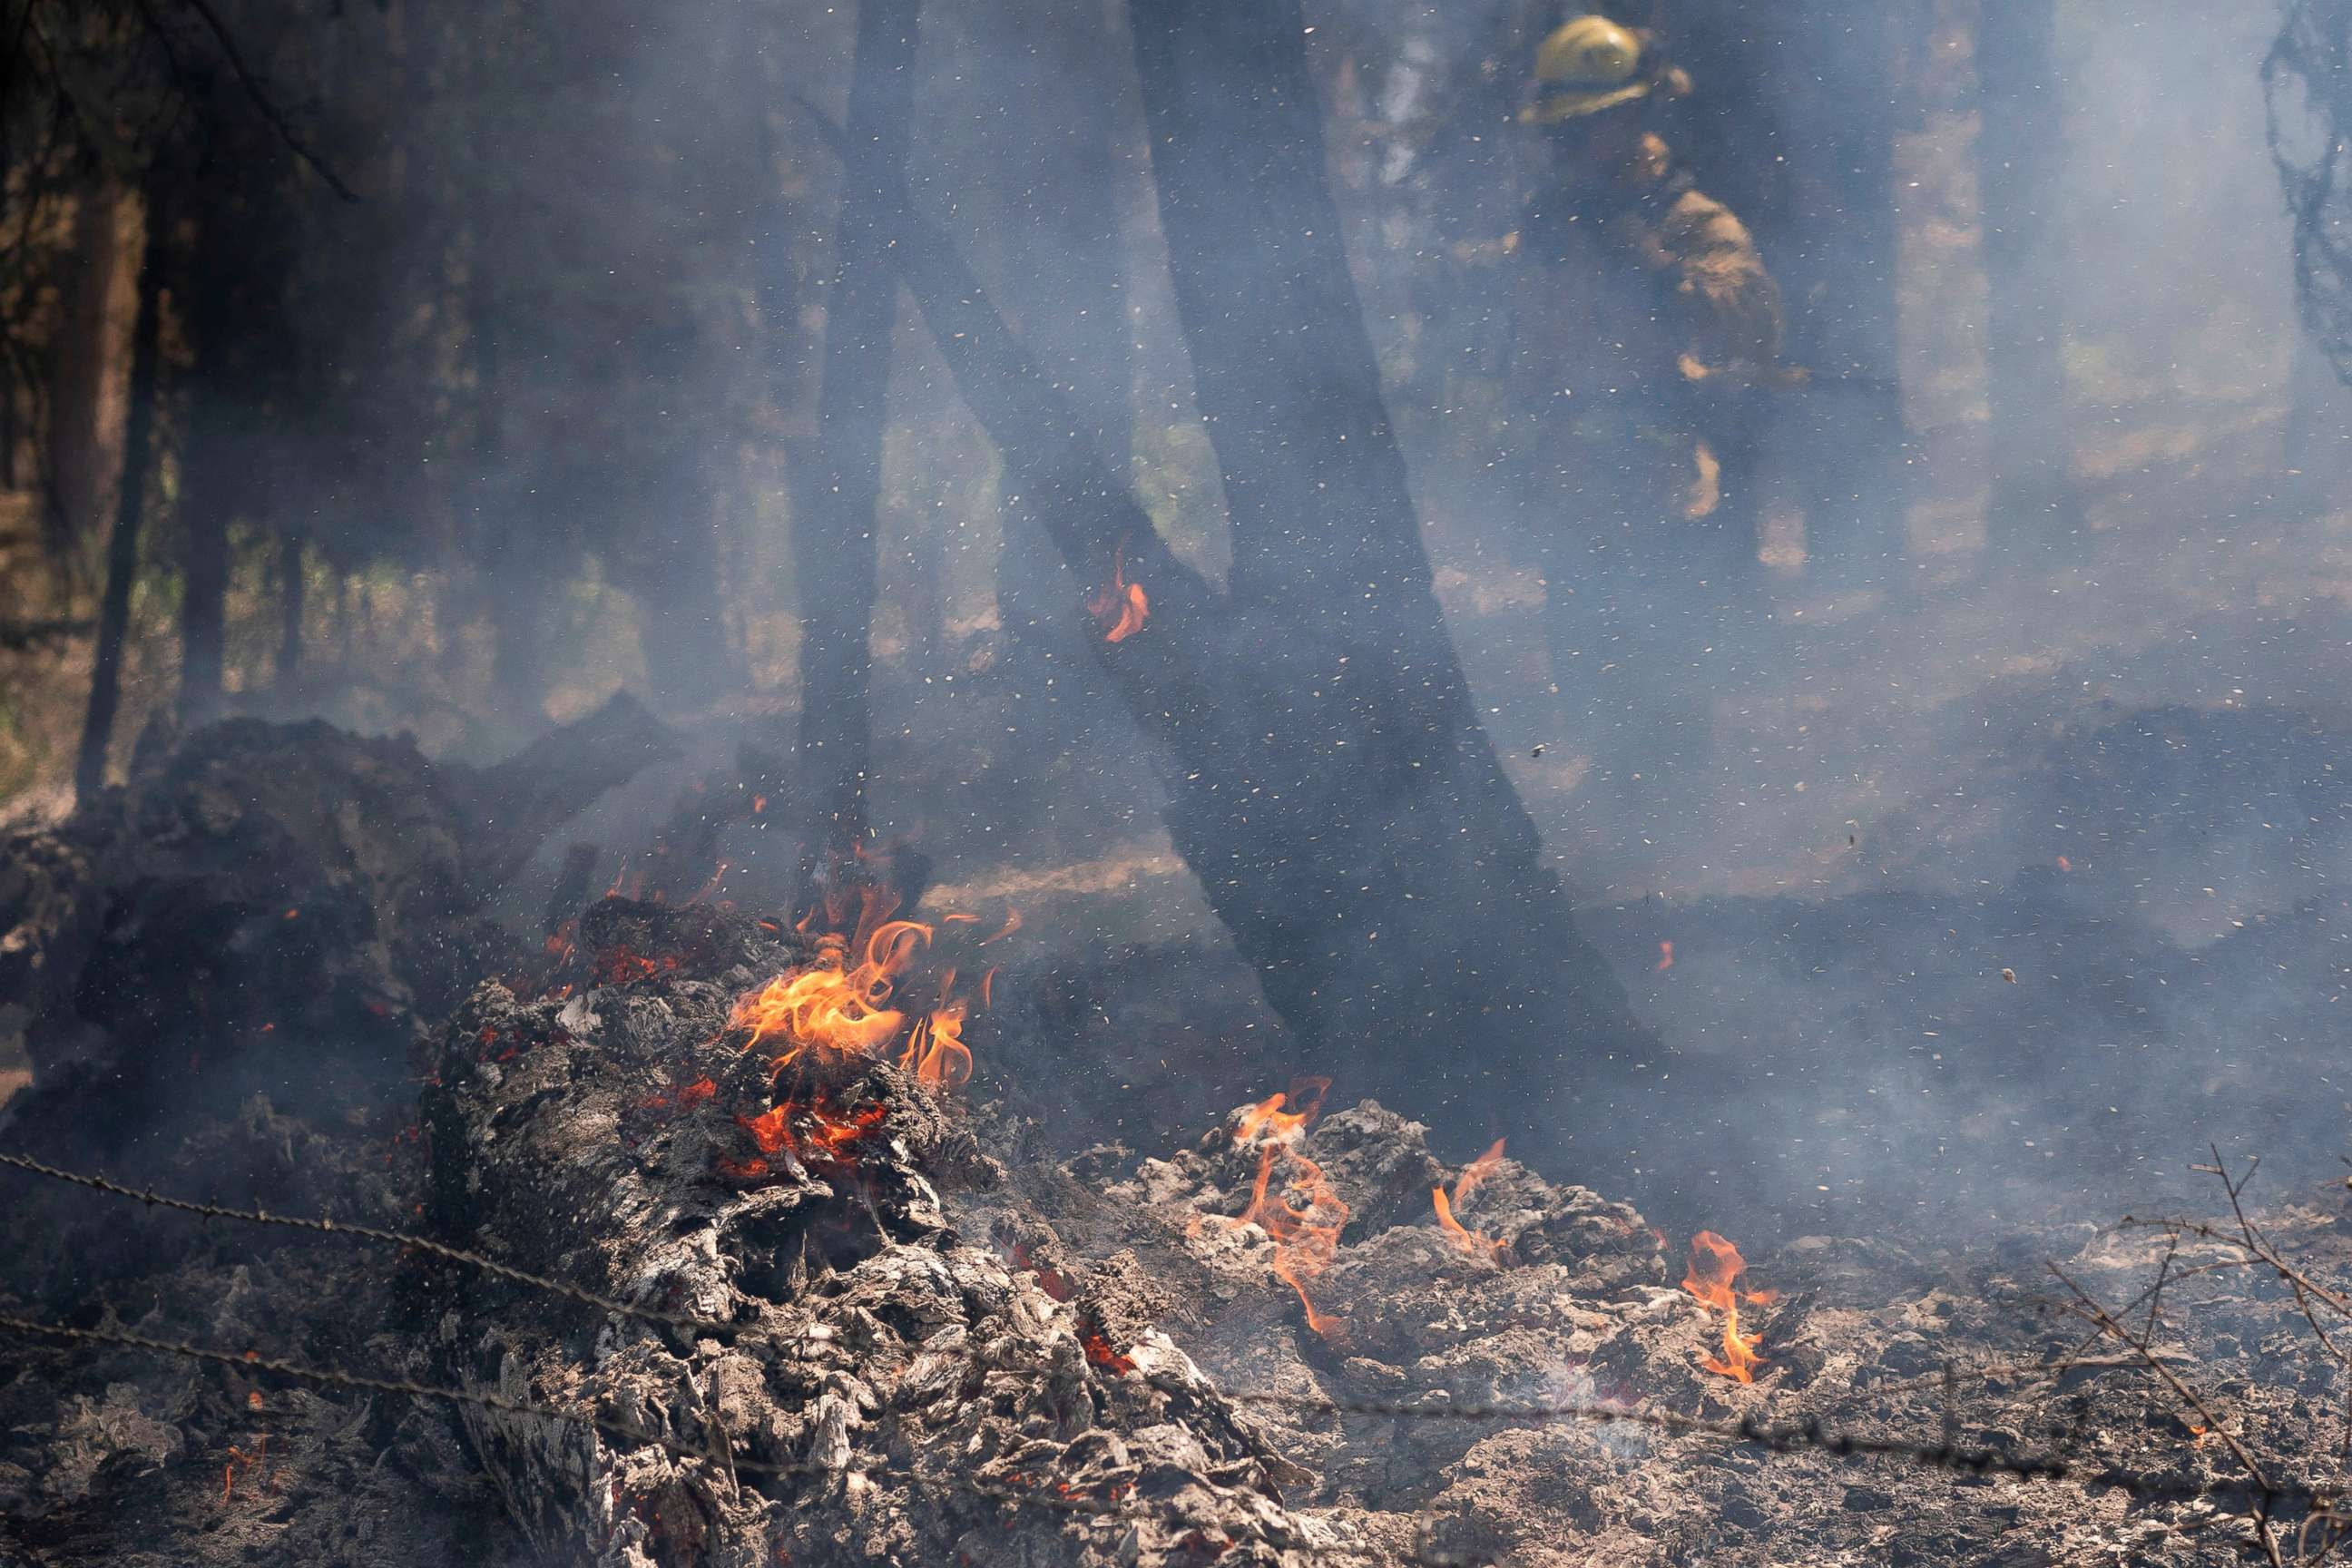 PHOTO: A log burns in an area hit hard by the Bootleg Fire near Bly Oregon, July 19, 2021.